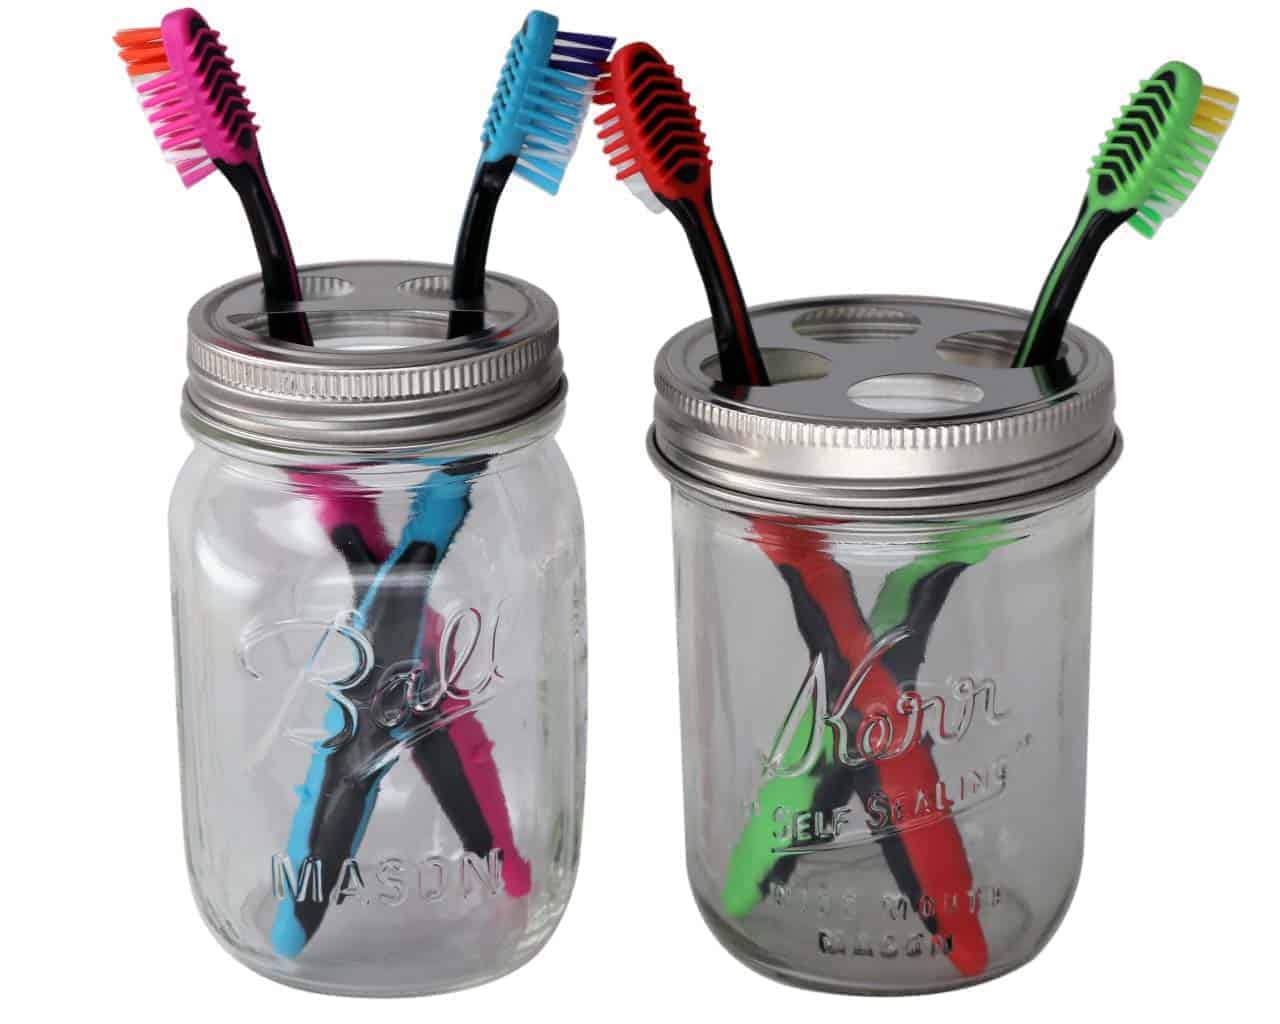 Toothbrush holder lids on wide mouth Kerr pint jar and regular mouth Ball pint jar with toothbrushes